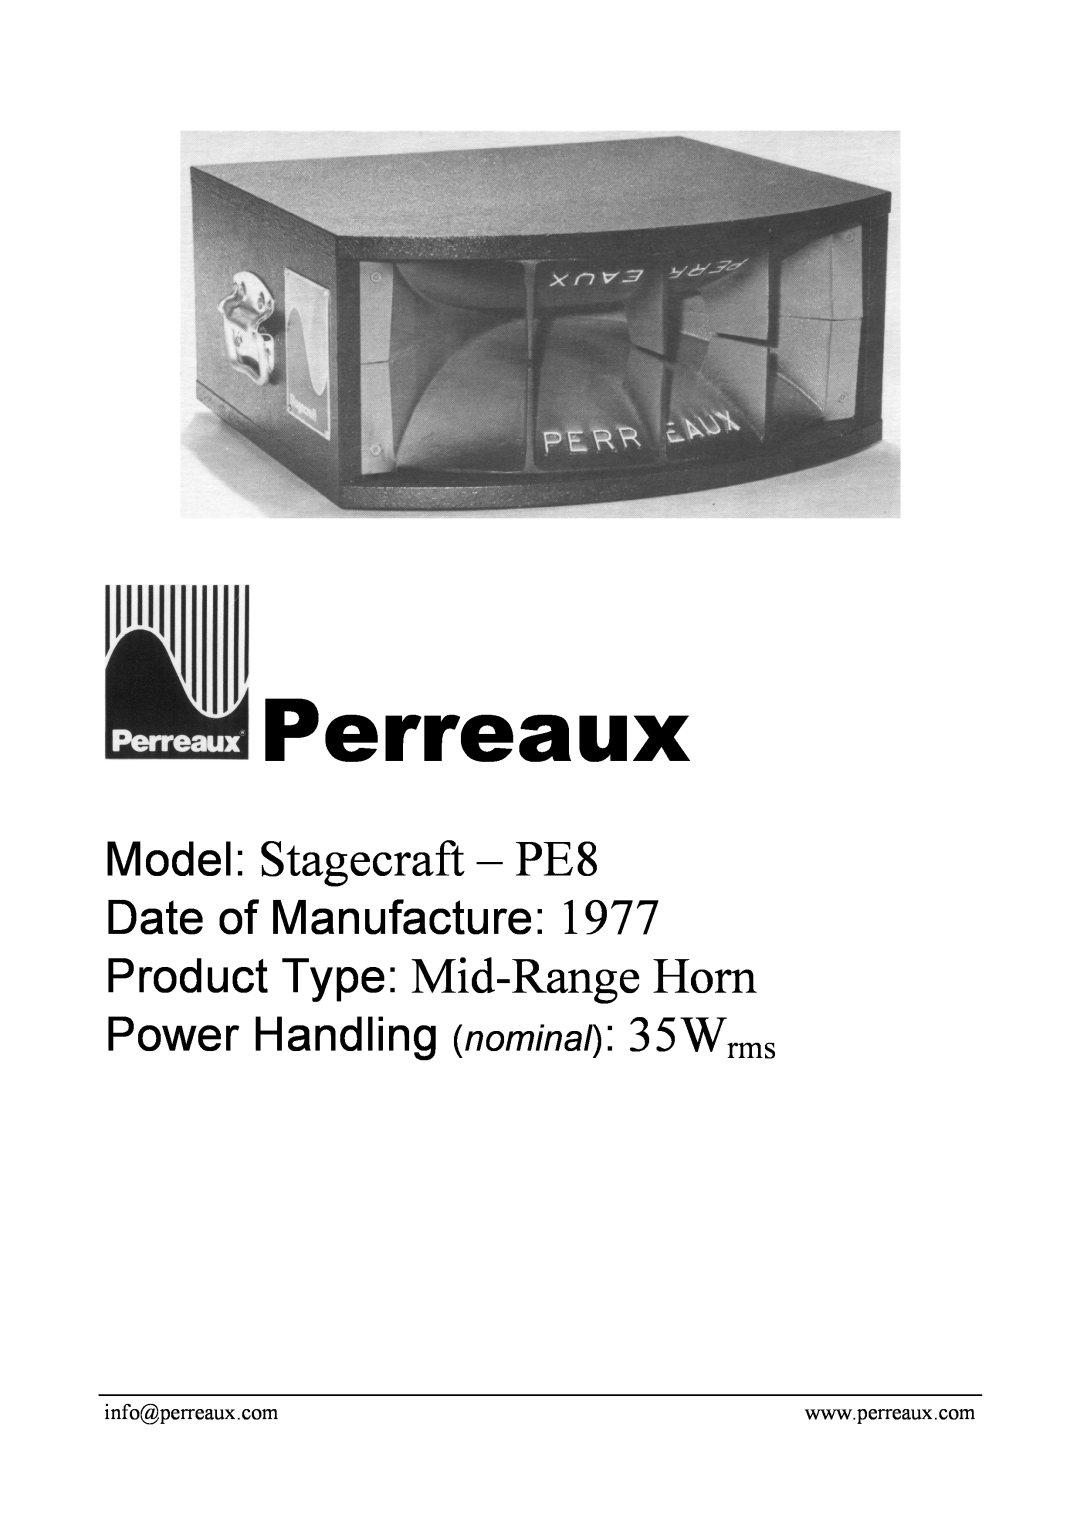 Perreaux STAGECRAFT PE8 manual Perreaux, Model Stagecraft - PE8, Date of Manufacture Product Type Mid-Range Horn 